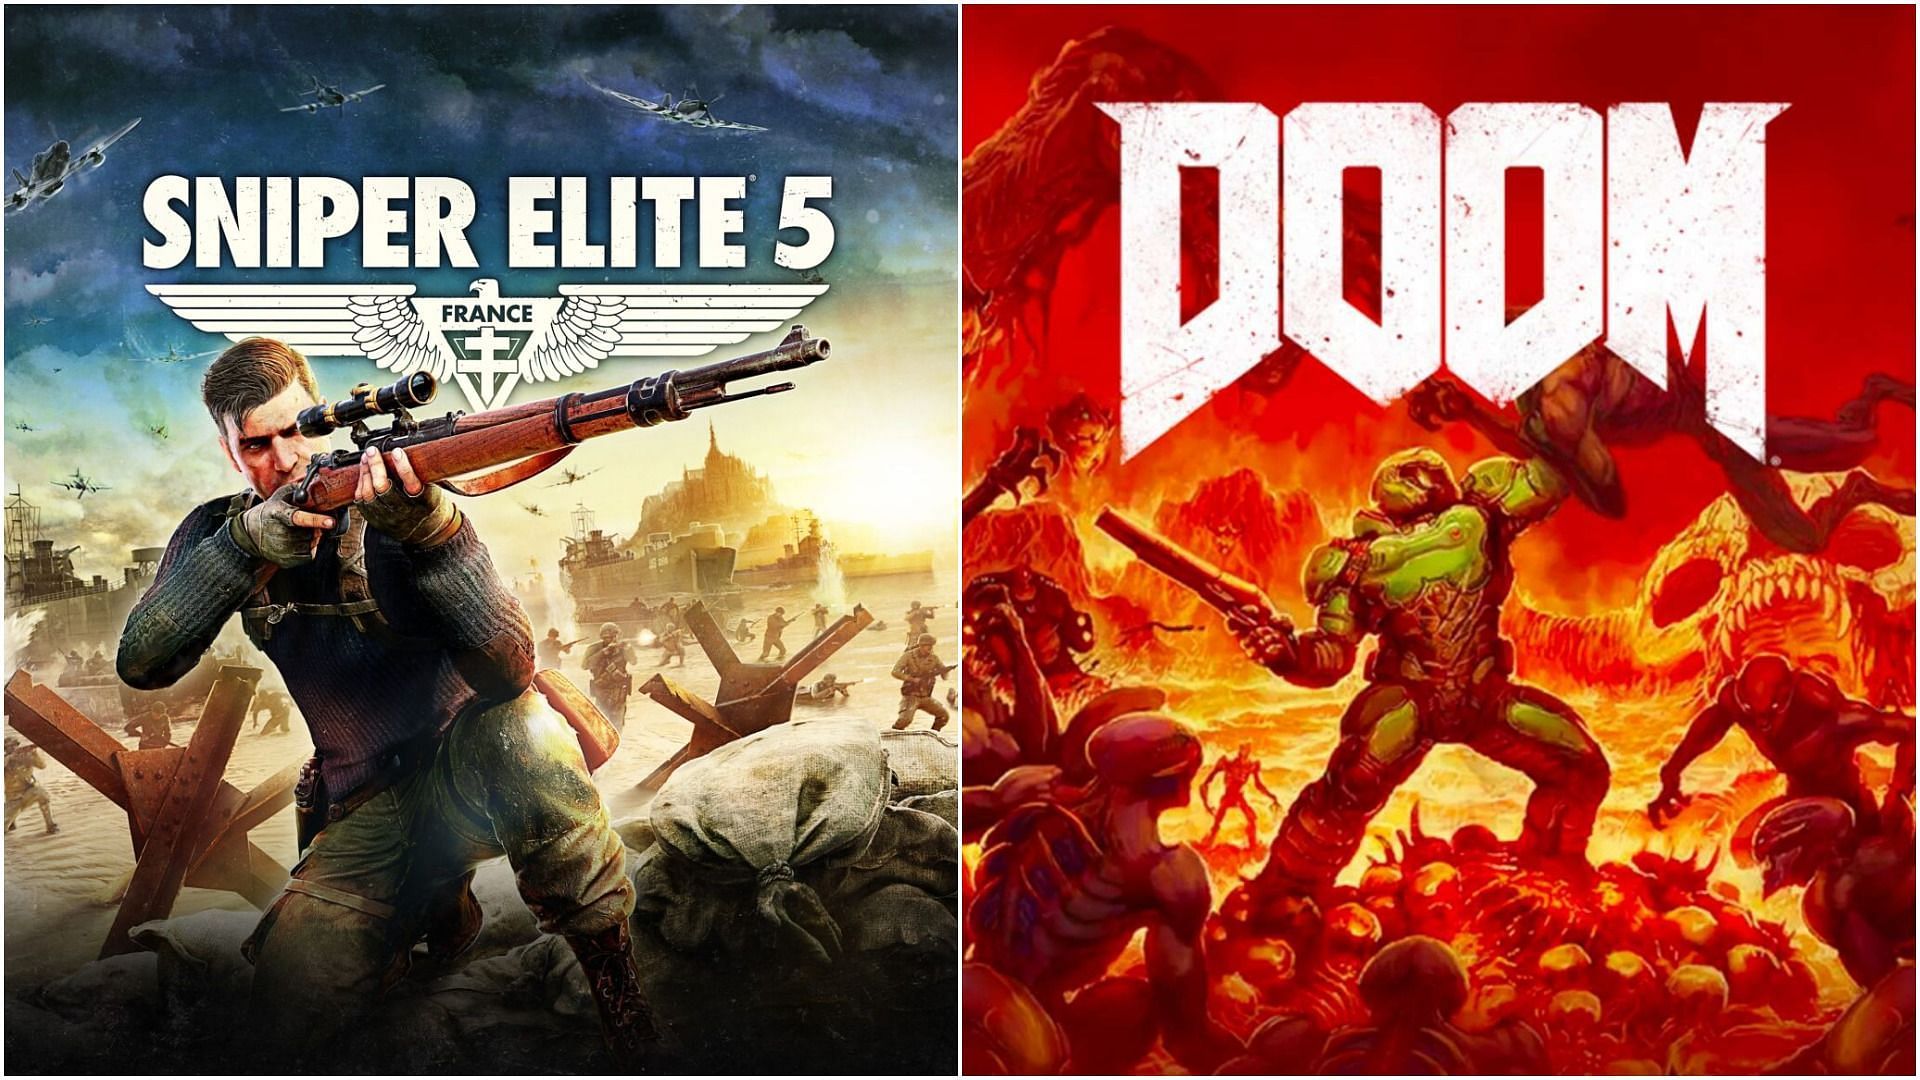 While Sniper Elite takes a stealth approach to gameplay while  Doom lets players revel in the action (image via Rebellion Developments and Bethesda)